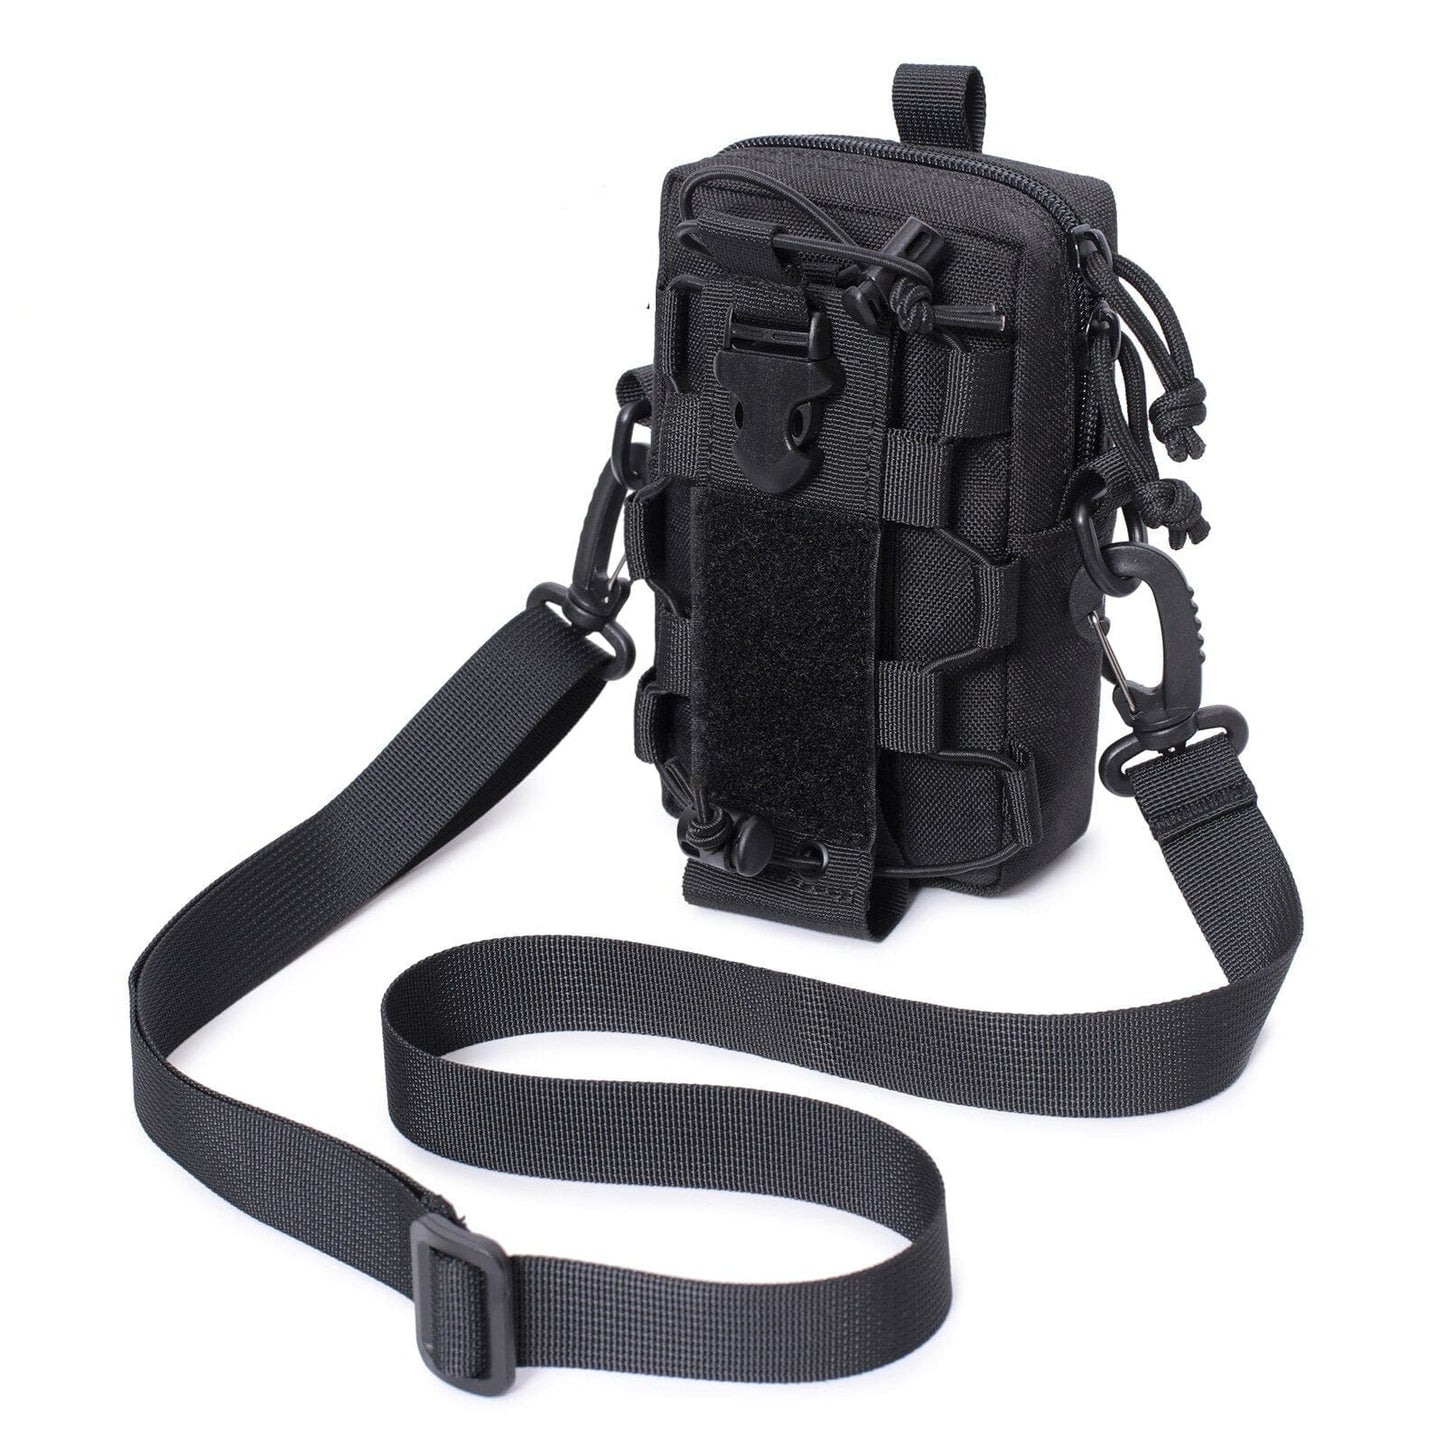 ACTION AIRSOFT 0 Black Sac bouteille EDC XGS multifonction